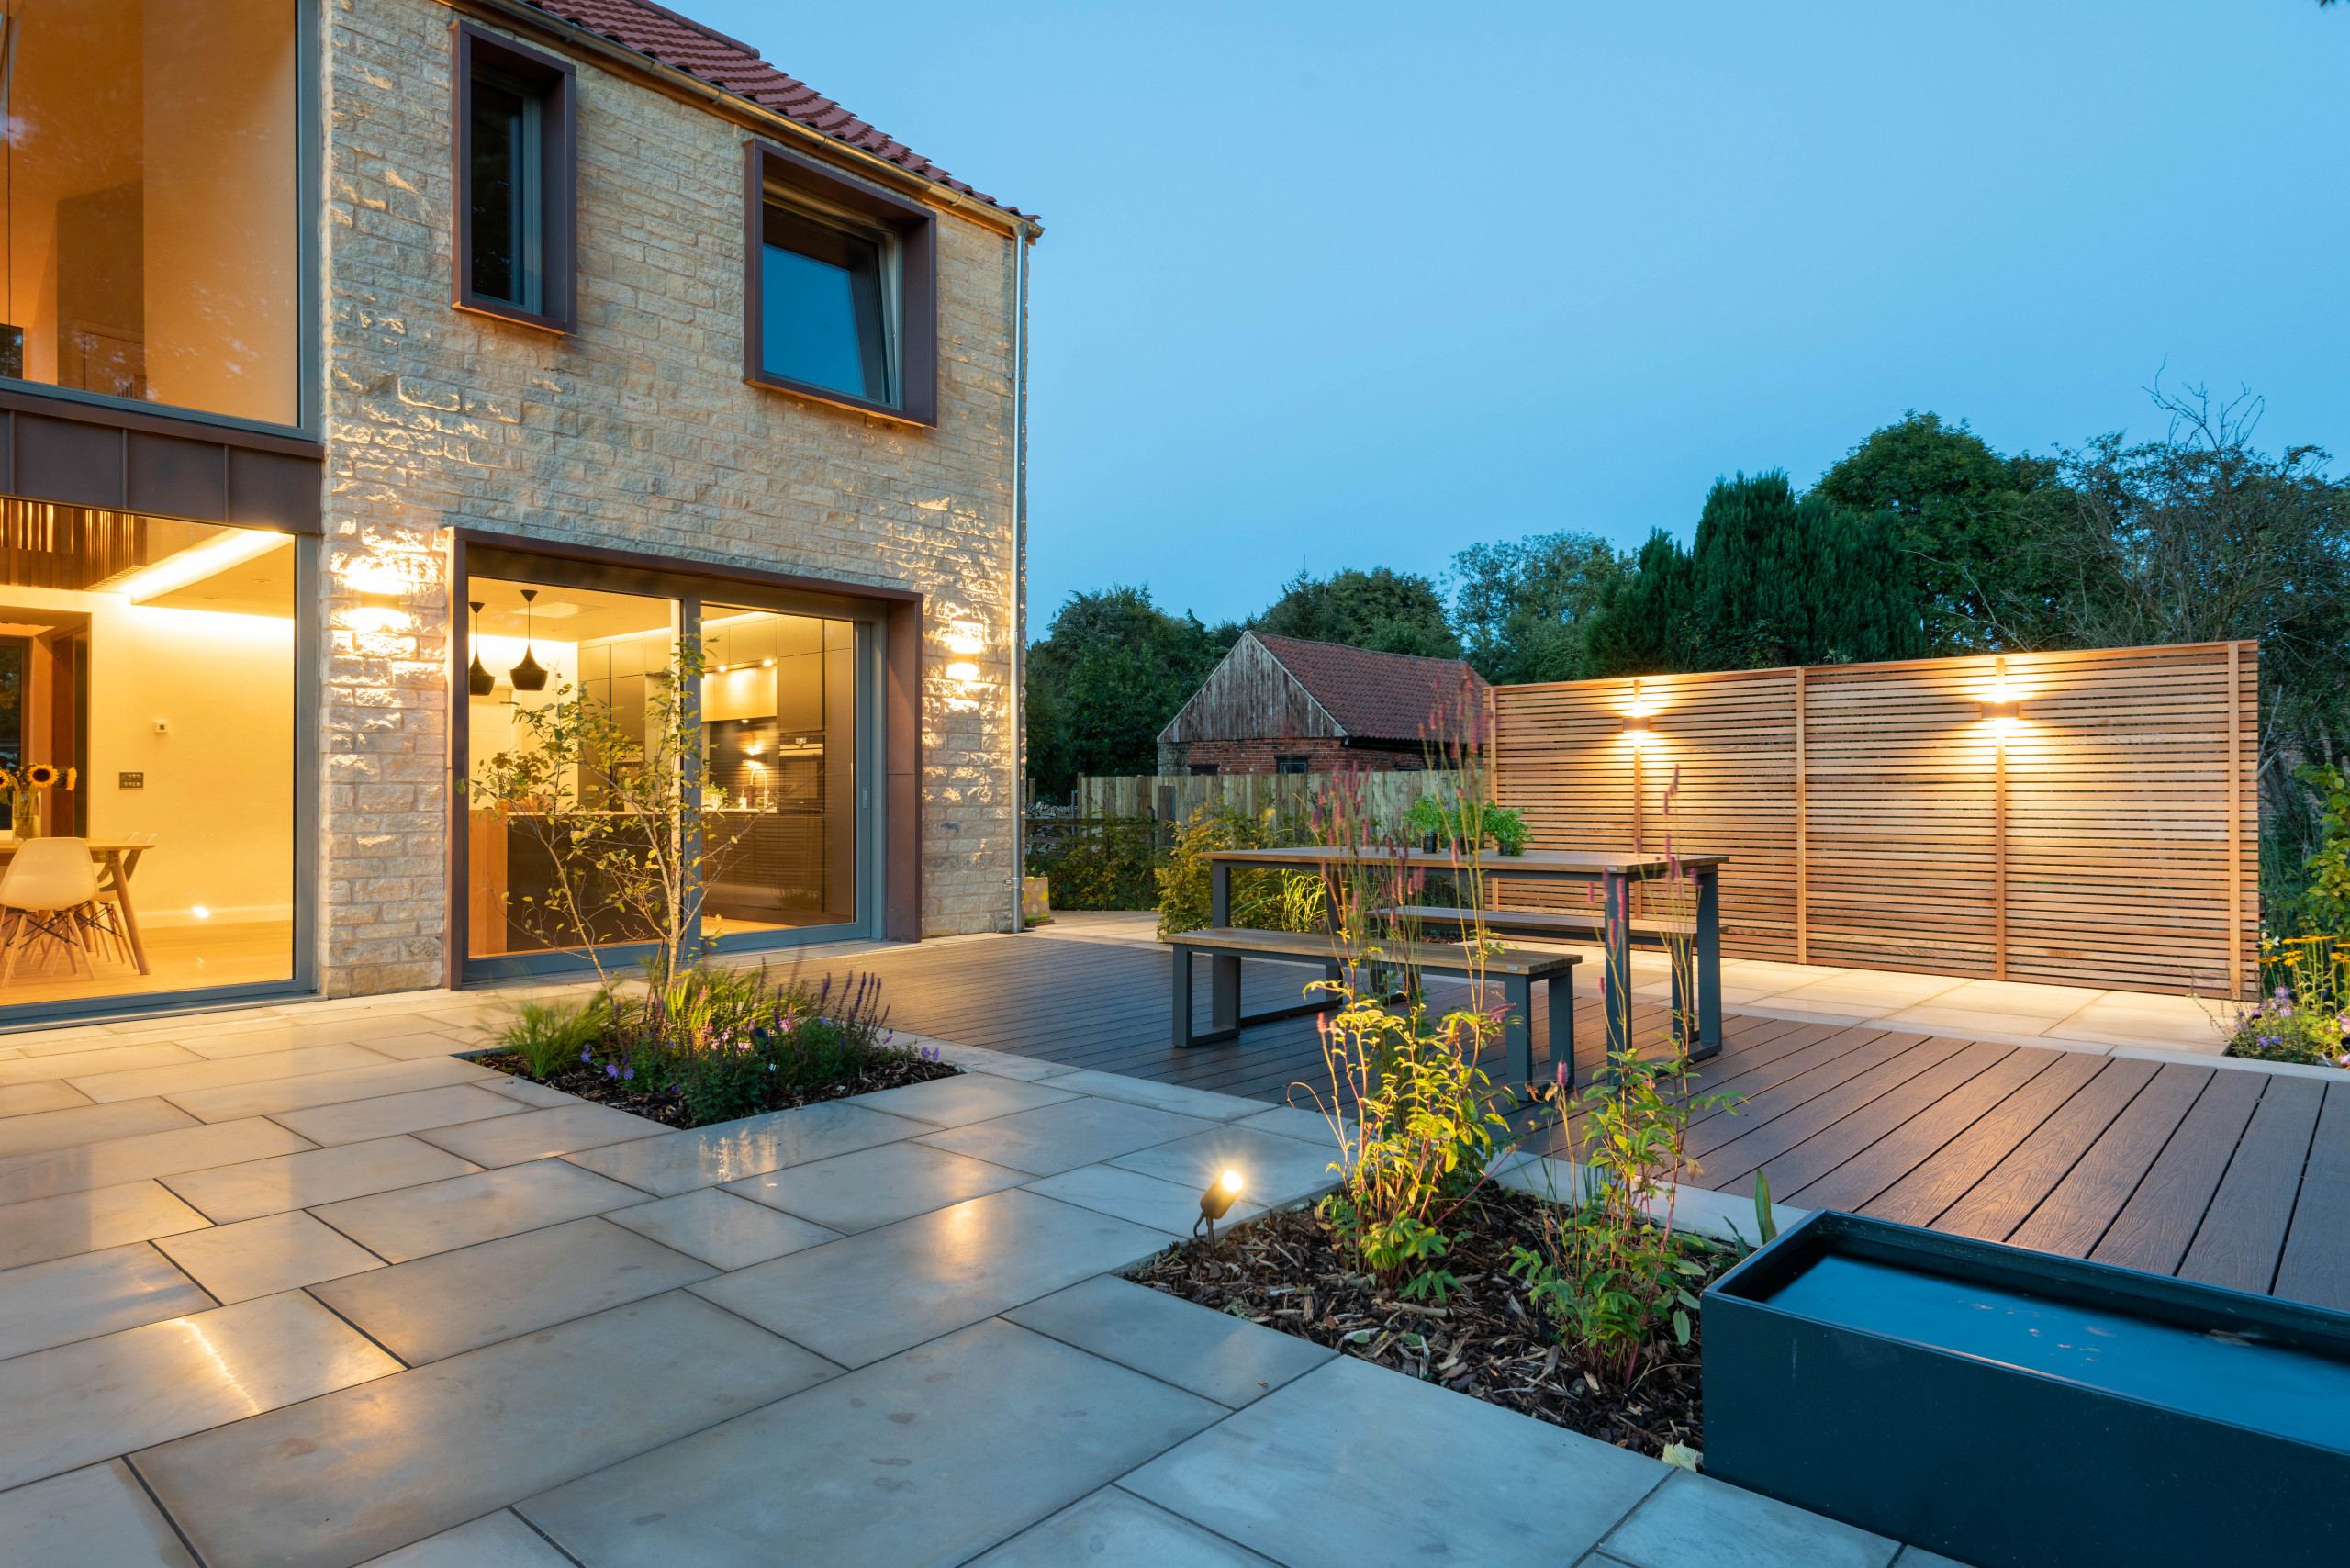 Architectural New Build with Integrated Garden Design